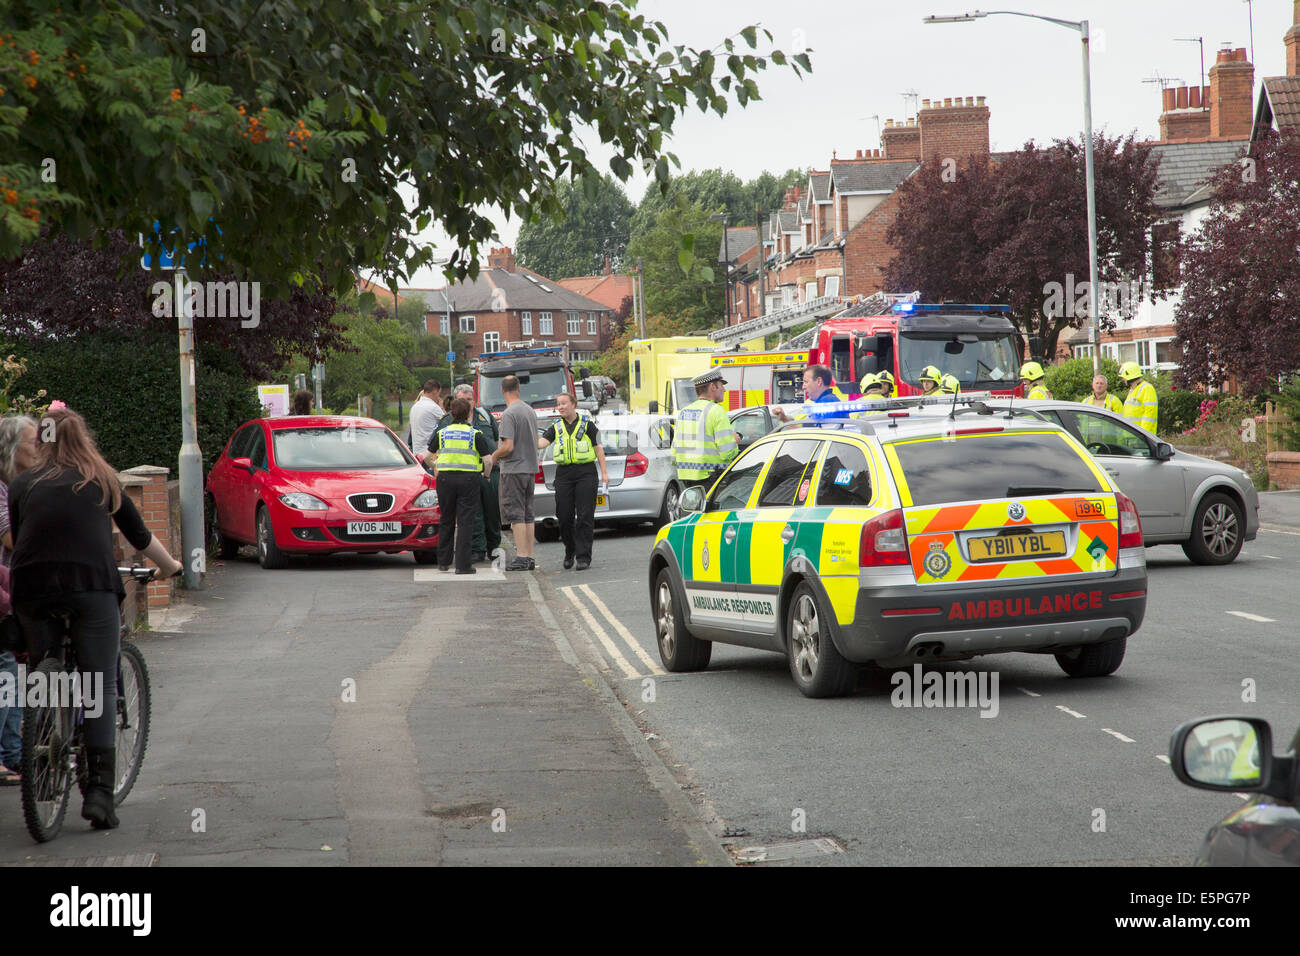 Road accident scene on a busy residential street in York, North Yorkshire, England. Stock Photo